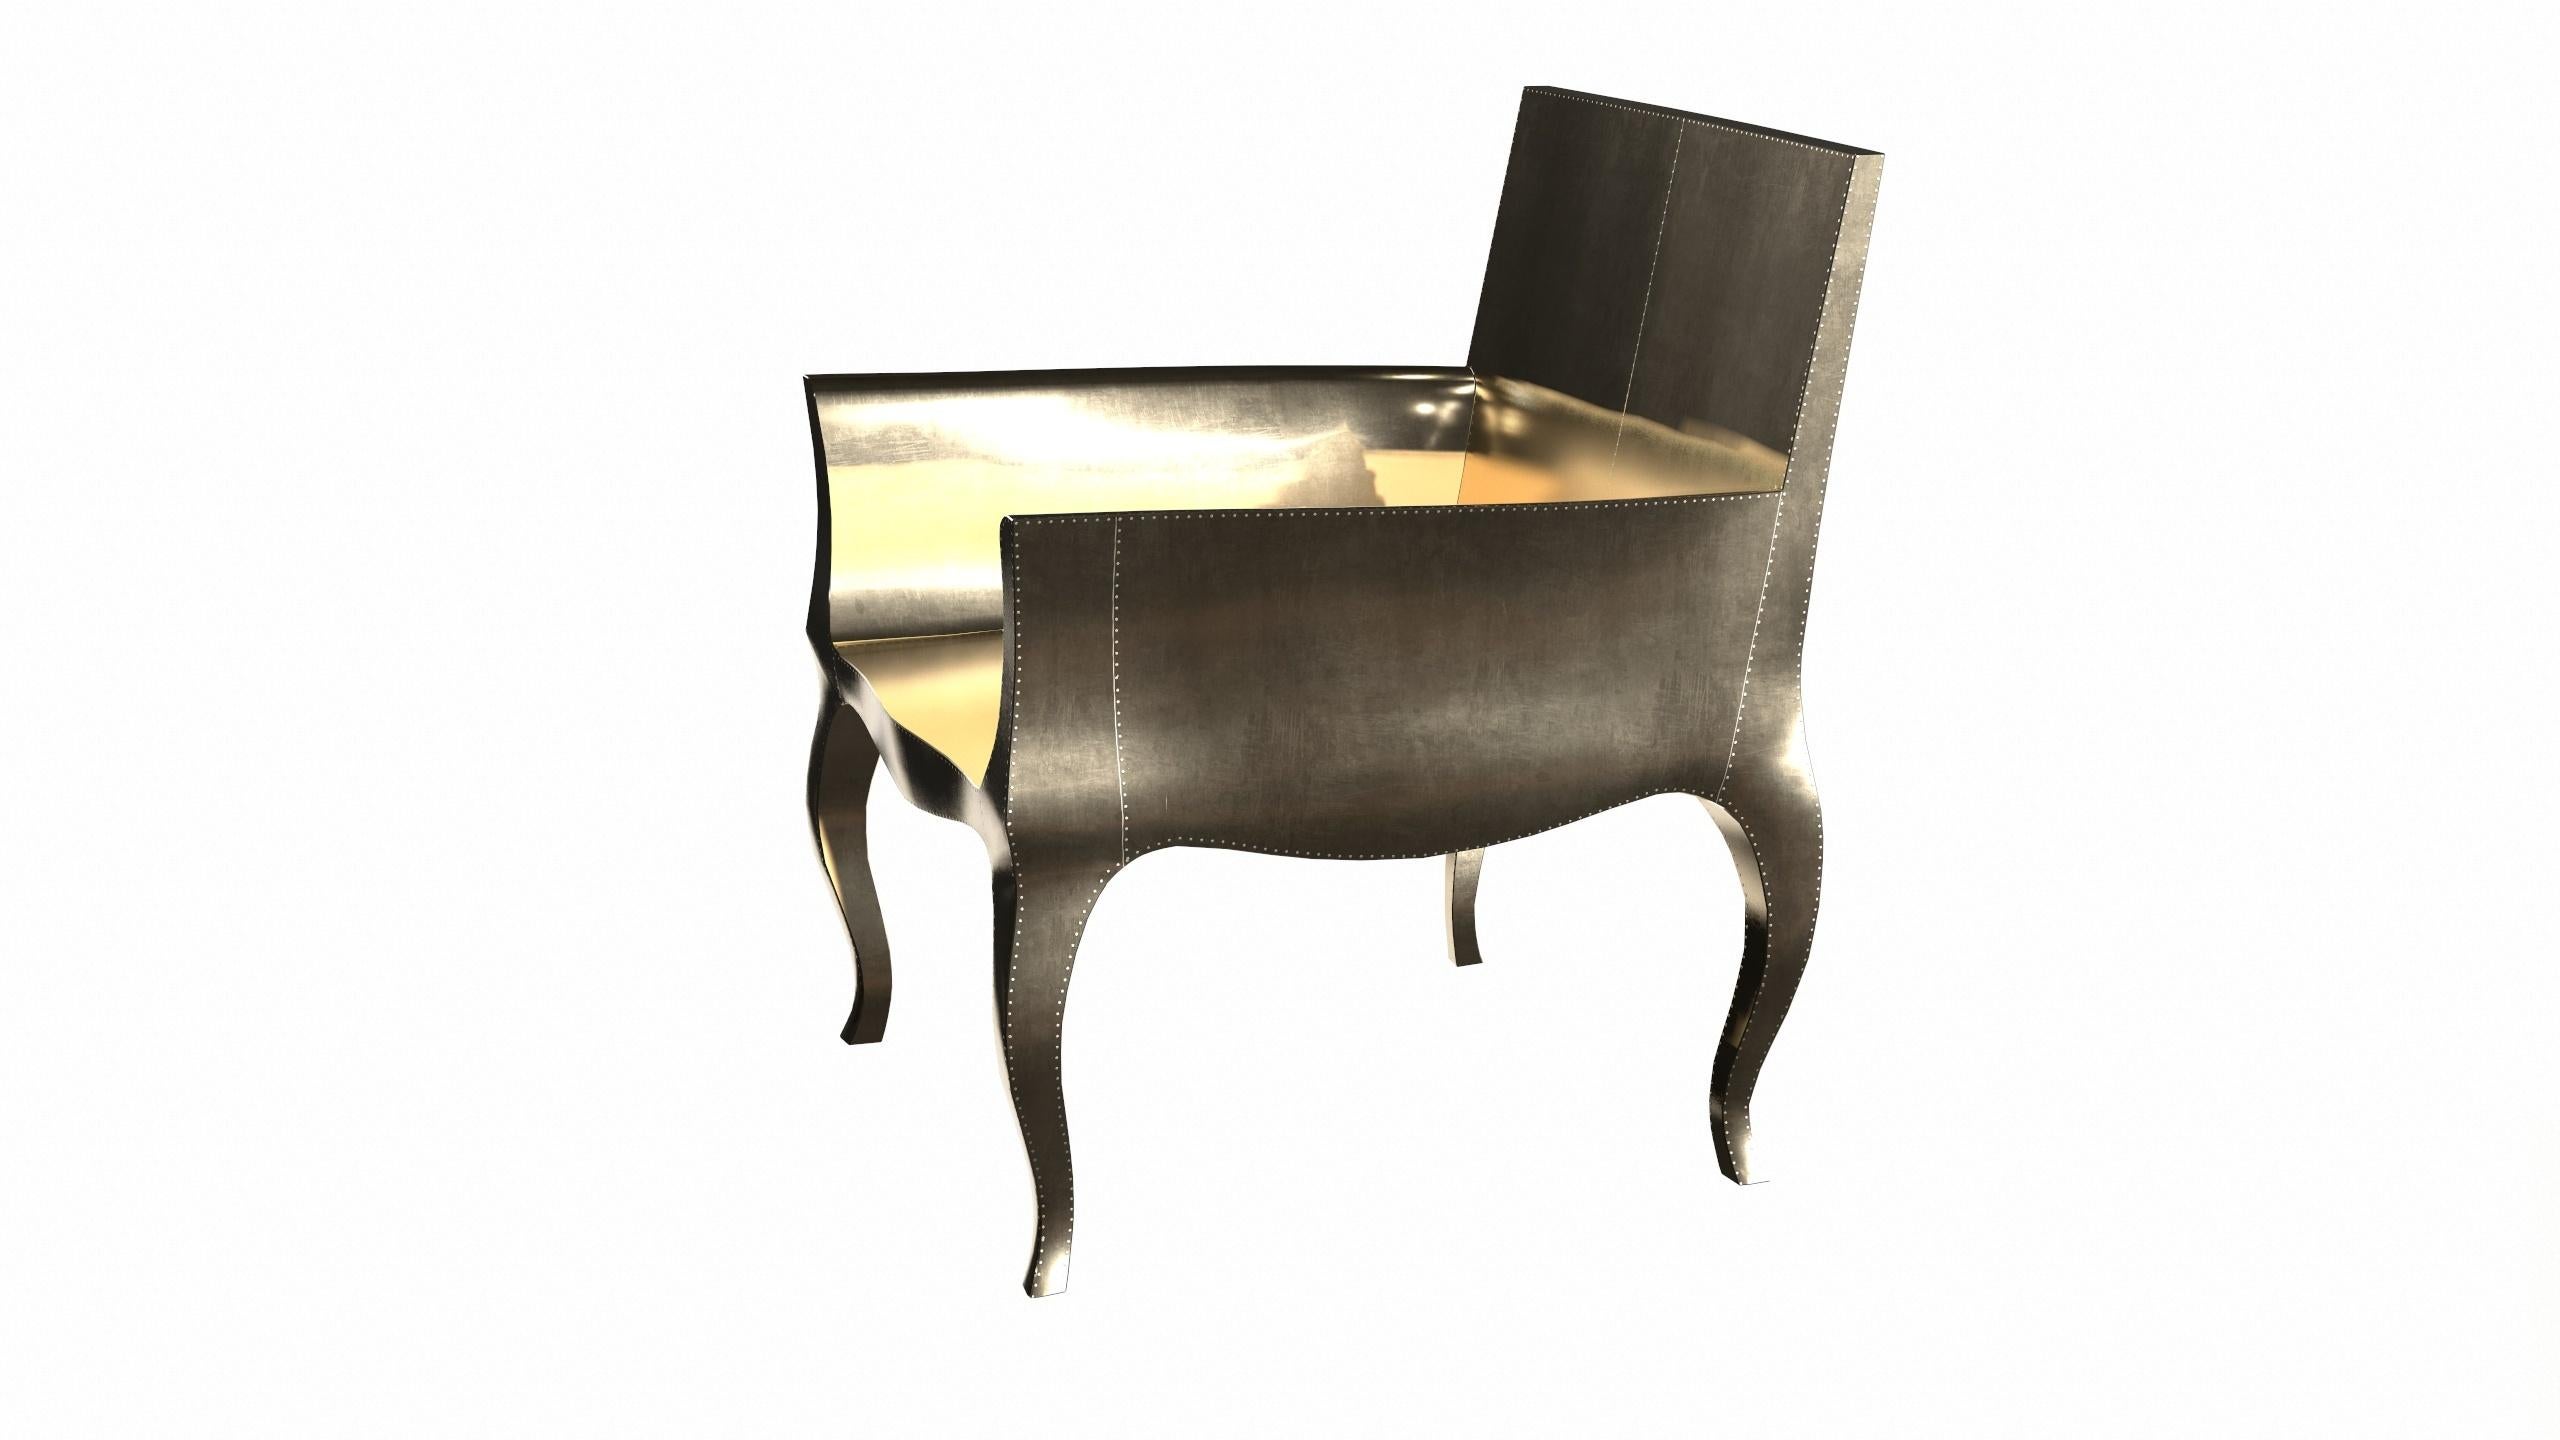 Hand-Carved Art Deco Accent Chair in Smooth Brass by Paul Mathieu for S. Odegard For Sale